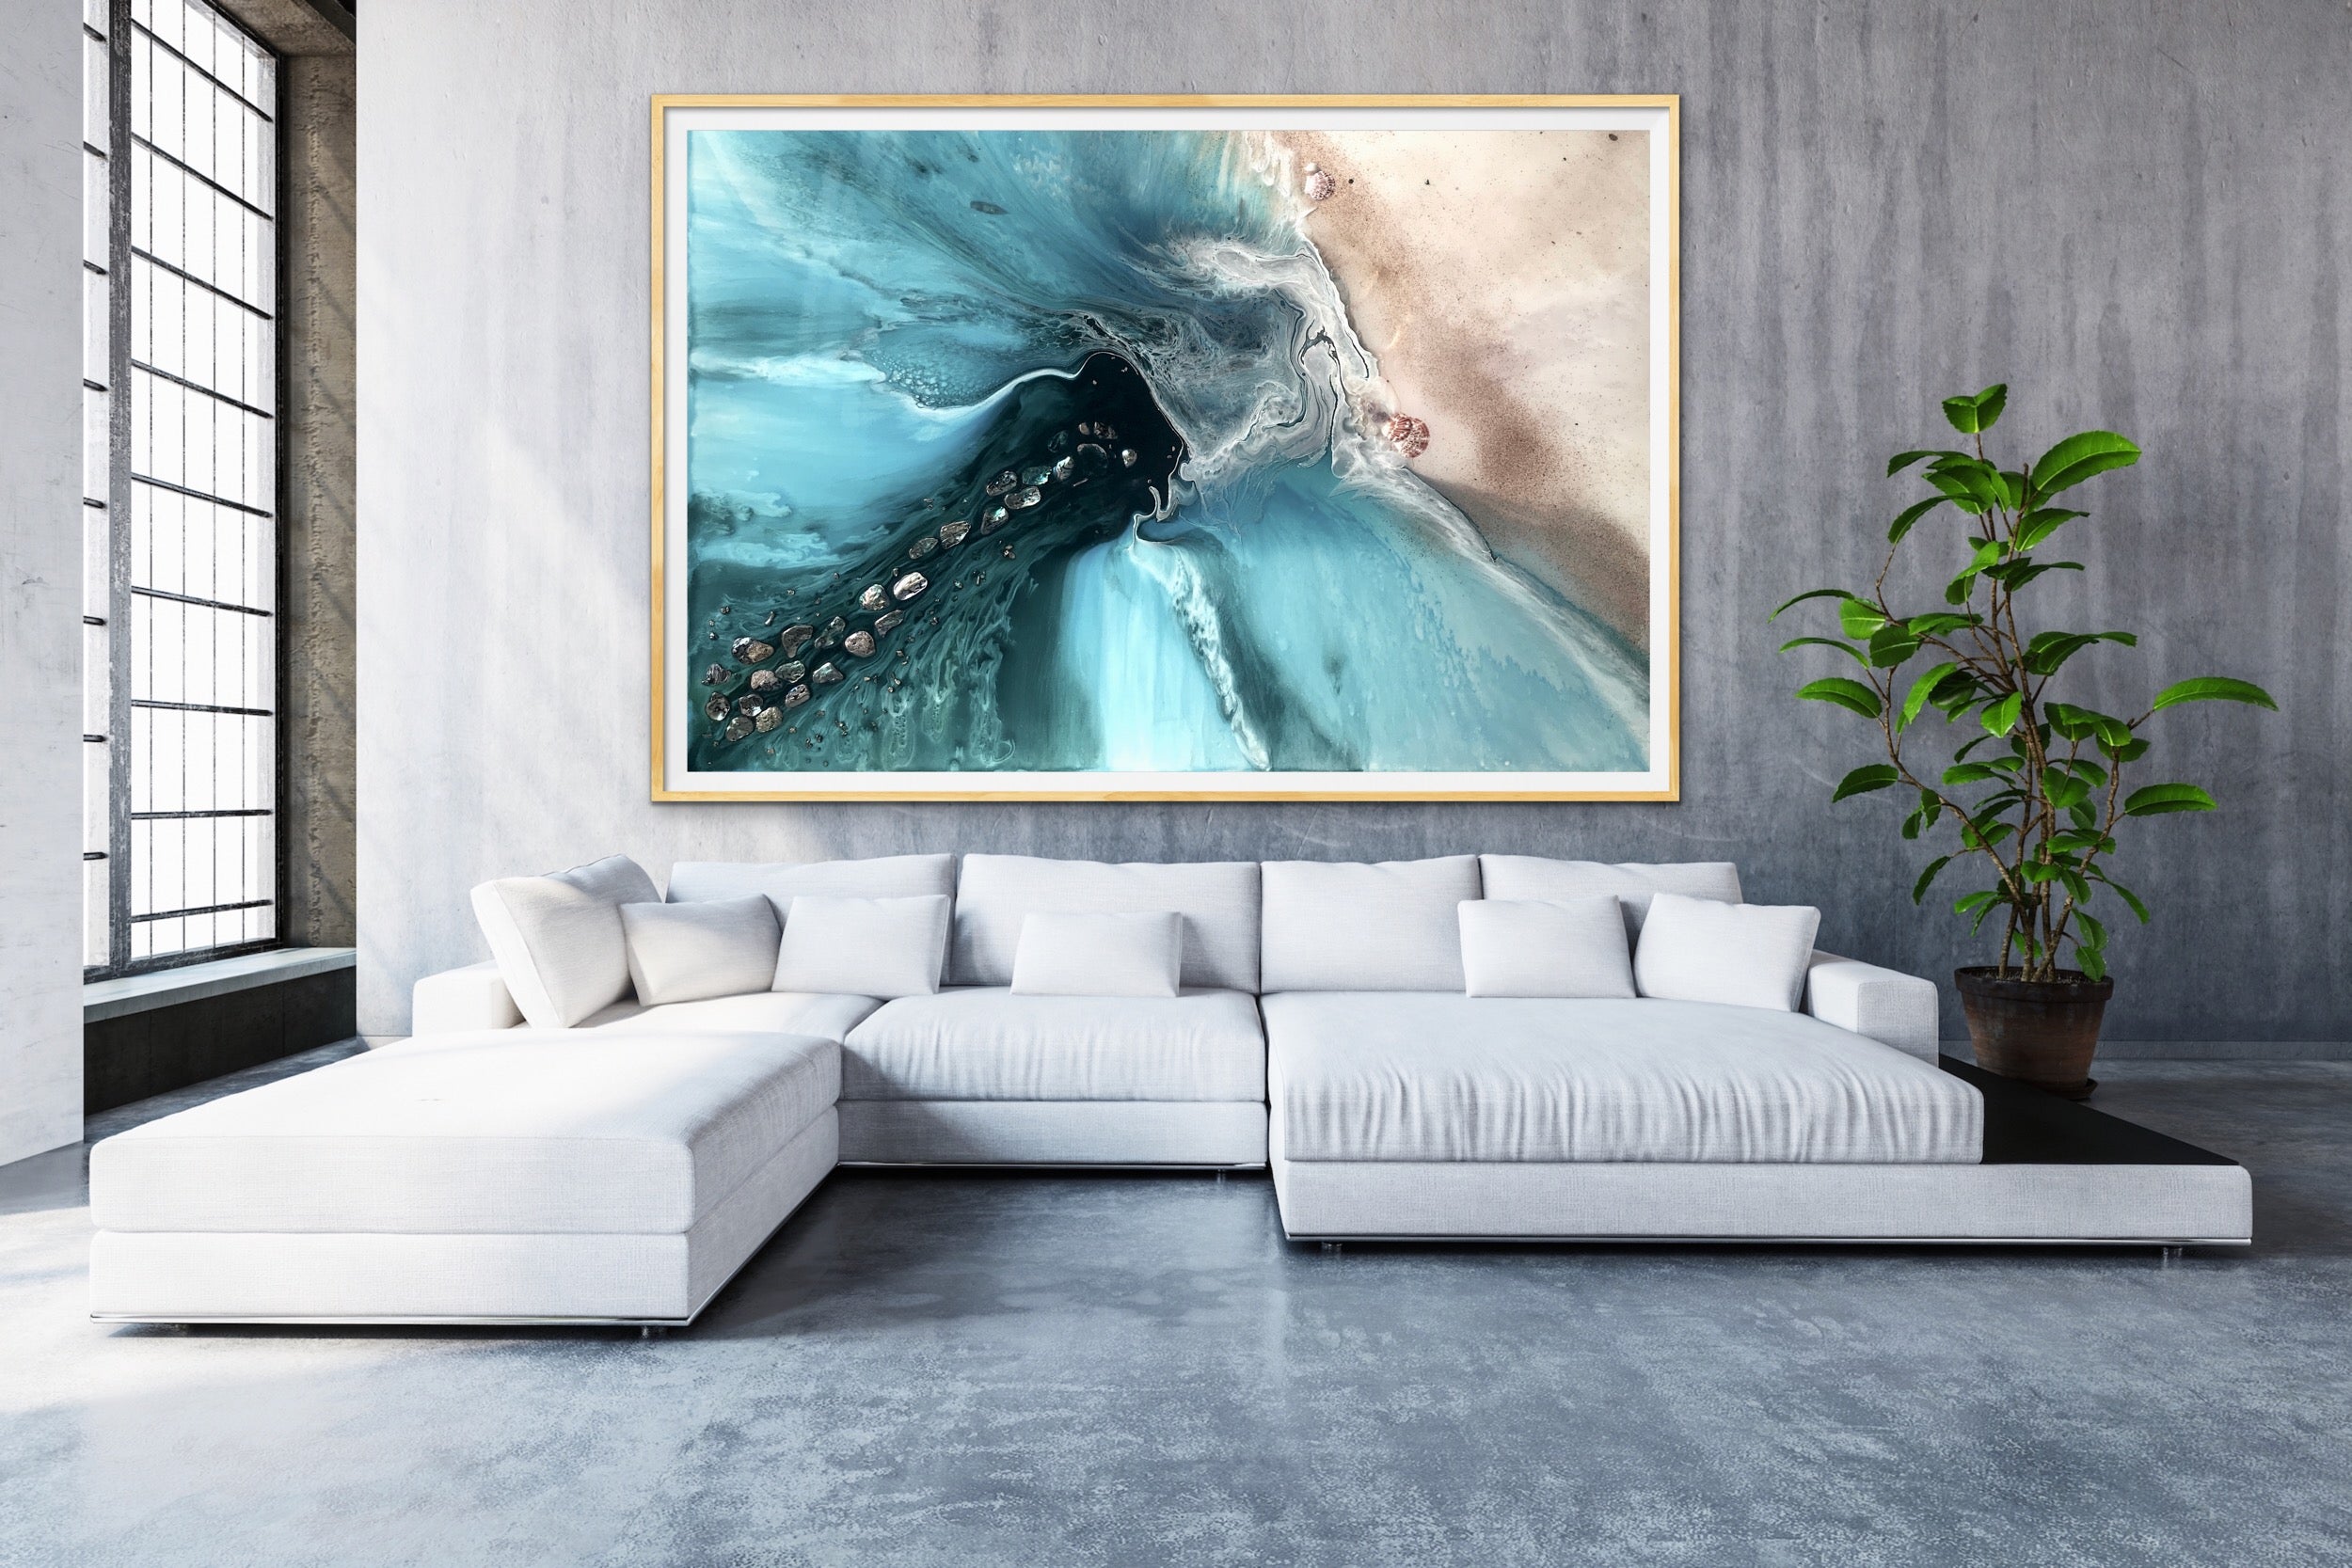 Abstract Sea. Muted Teal. Rise Above 4 Neutral. Art print. Antuanelle Ocean Seascape. Limited Edition Print